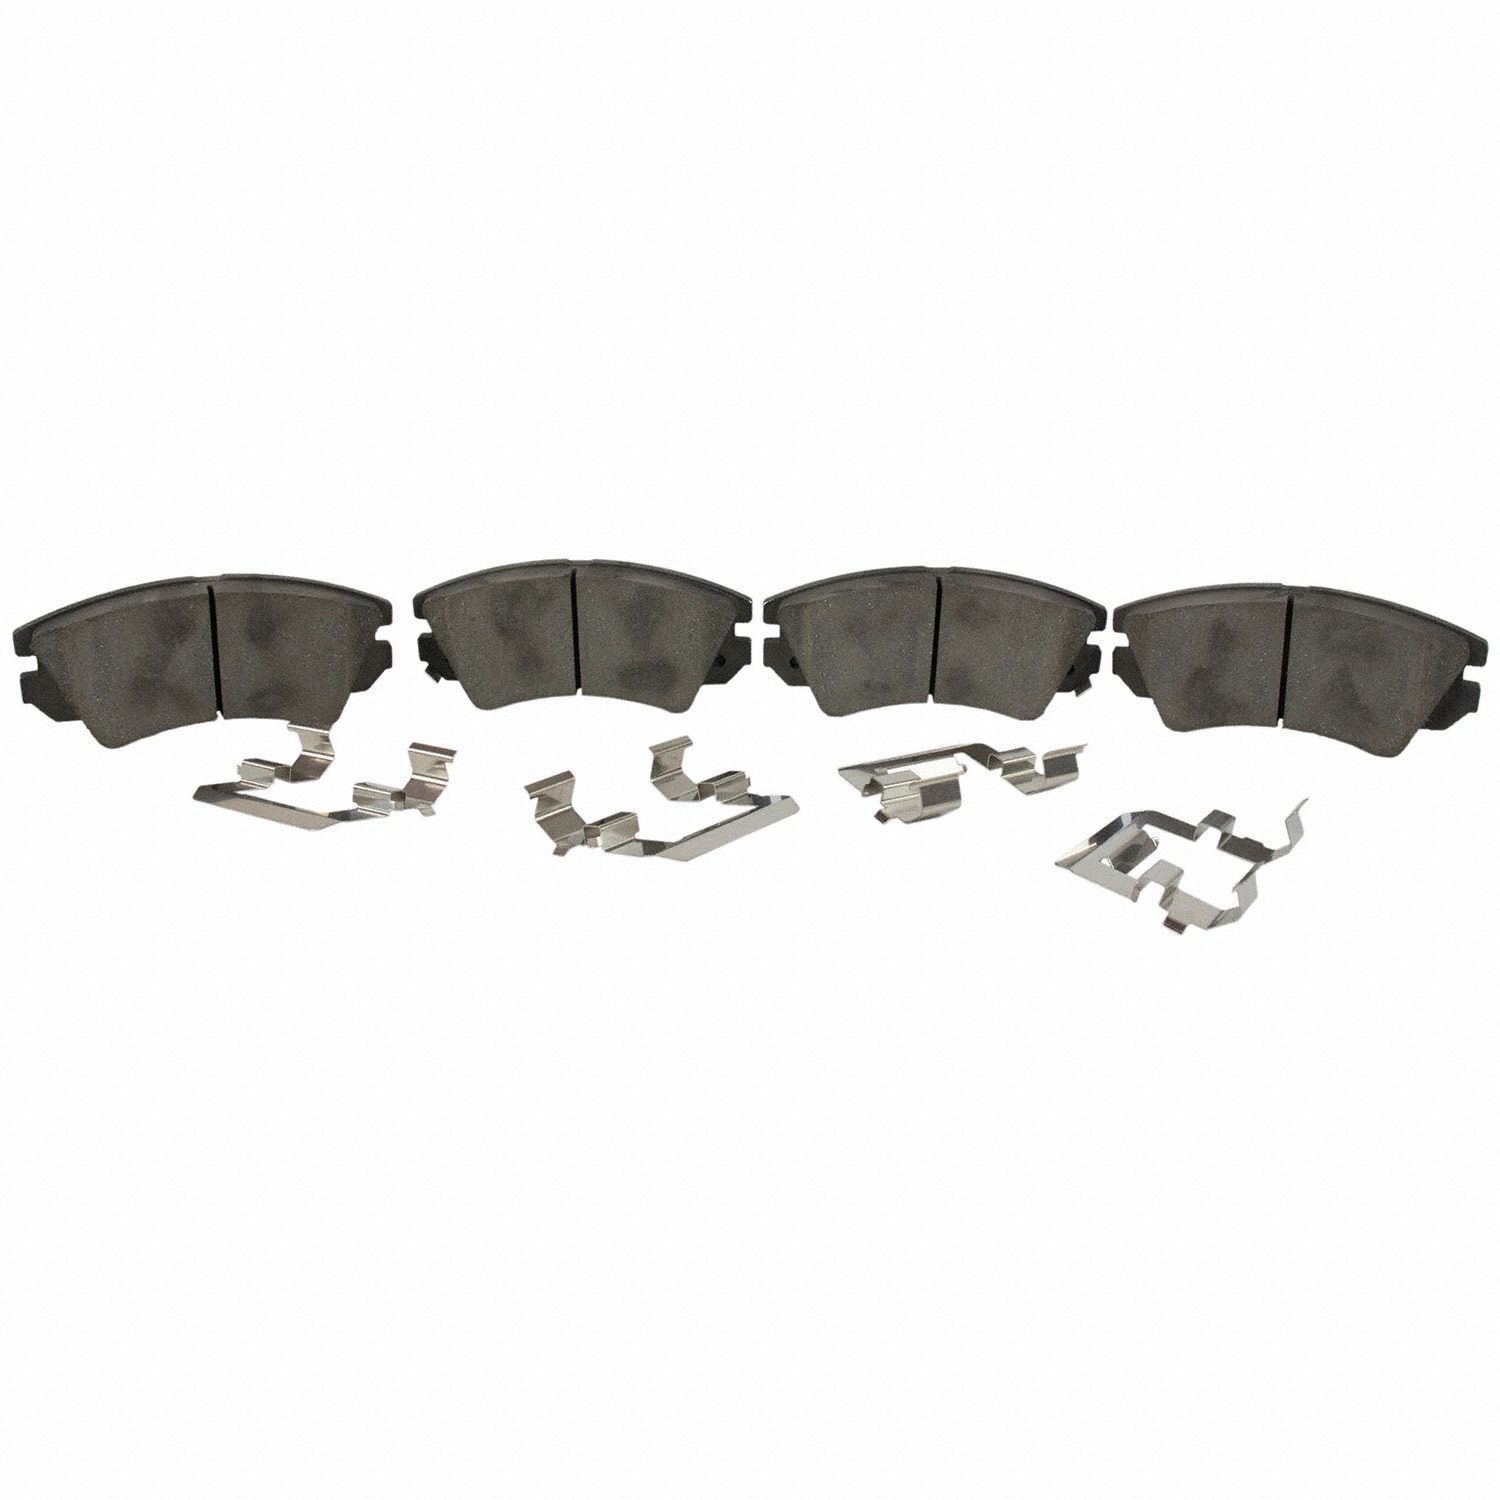 Ford® and Lincoln® Disc Pads and Brake Shoes Parts : FordParts.com